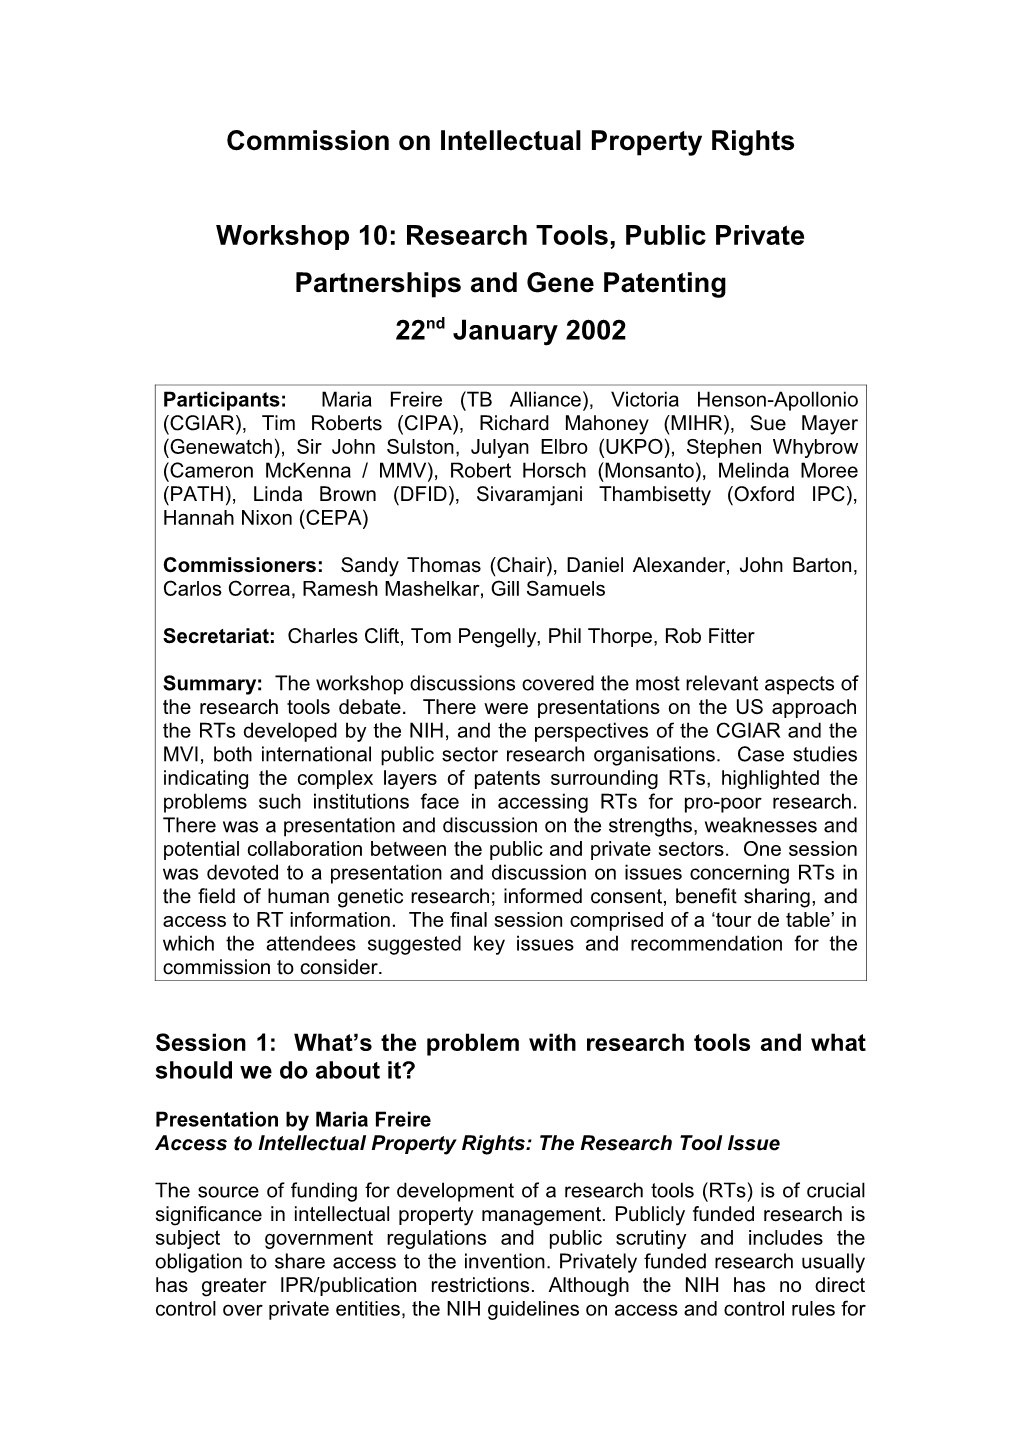 Research Tools, Public Private Partnerships and Gene Patenting Workshop - London 22 January 2002